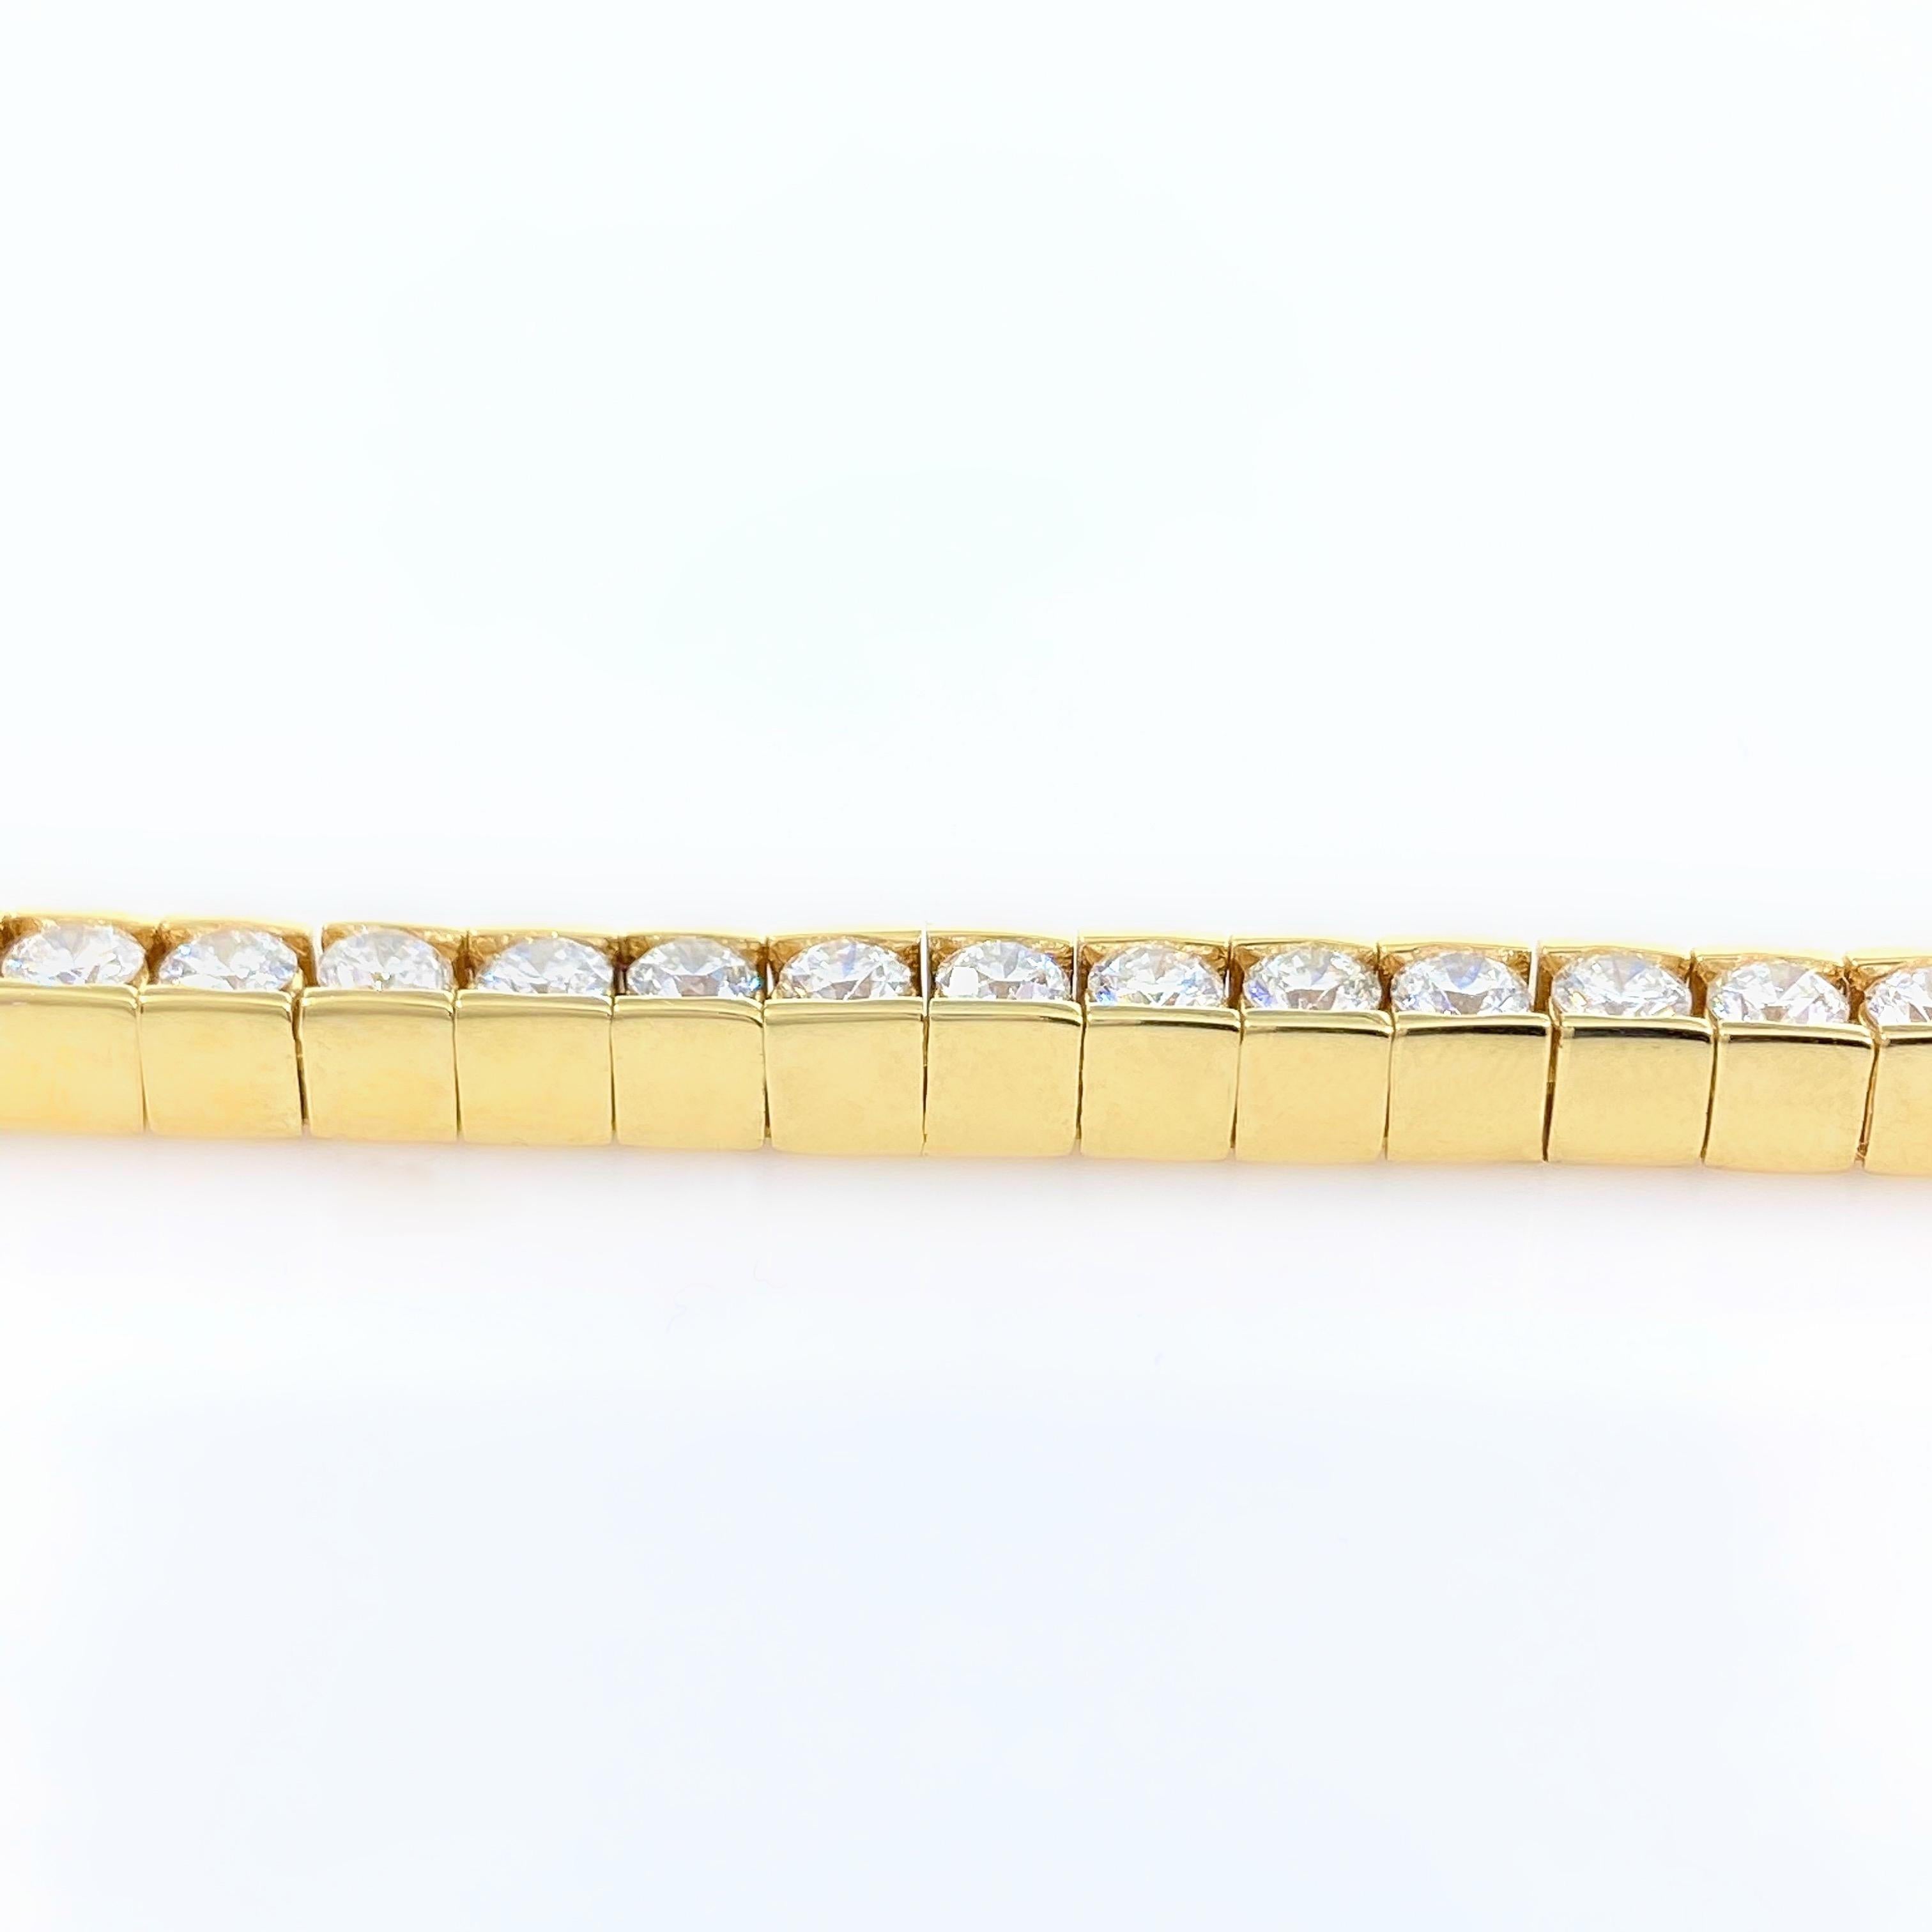 Diamond Tennis Bracelet
Style:  Channel-Set
Metal:  14 kt Yellow Gold
Weight:  20 grams
Size:  7' Inches / 4 MM
TCW:  6.00 tcw
Main Diamond:  56 Round Brilliant Diamonds
Color & Clarity:  H / VS2 - SI1
Hallmark:  14K
Includes:  Certified Appraisal -